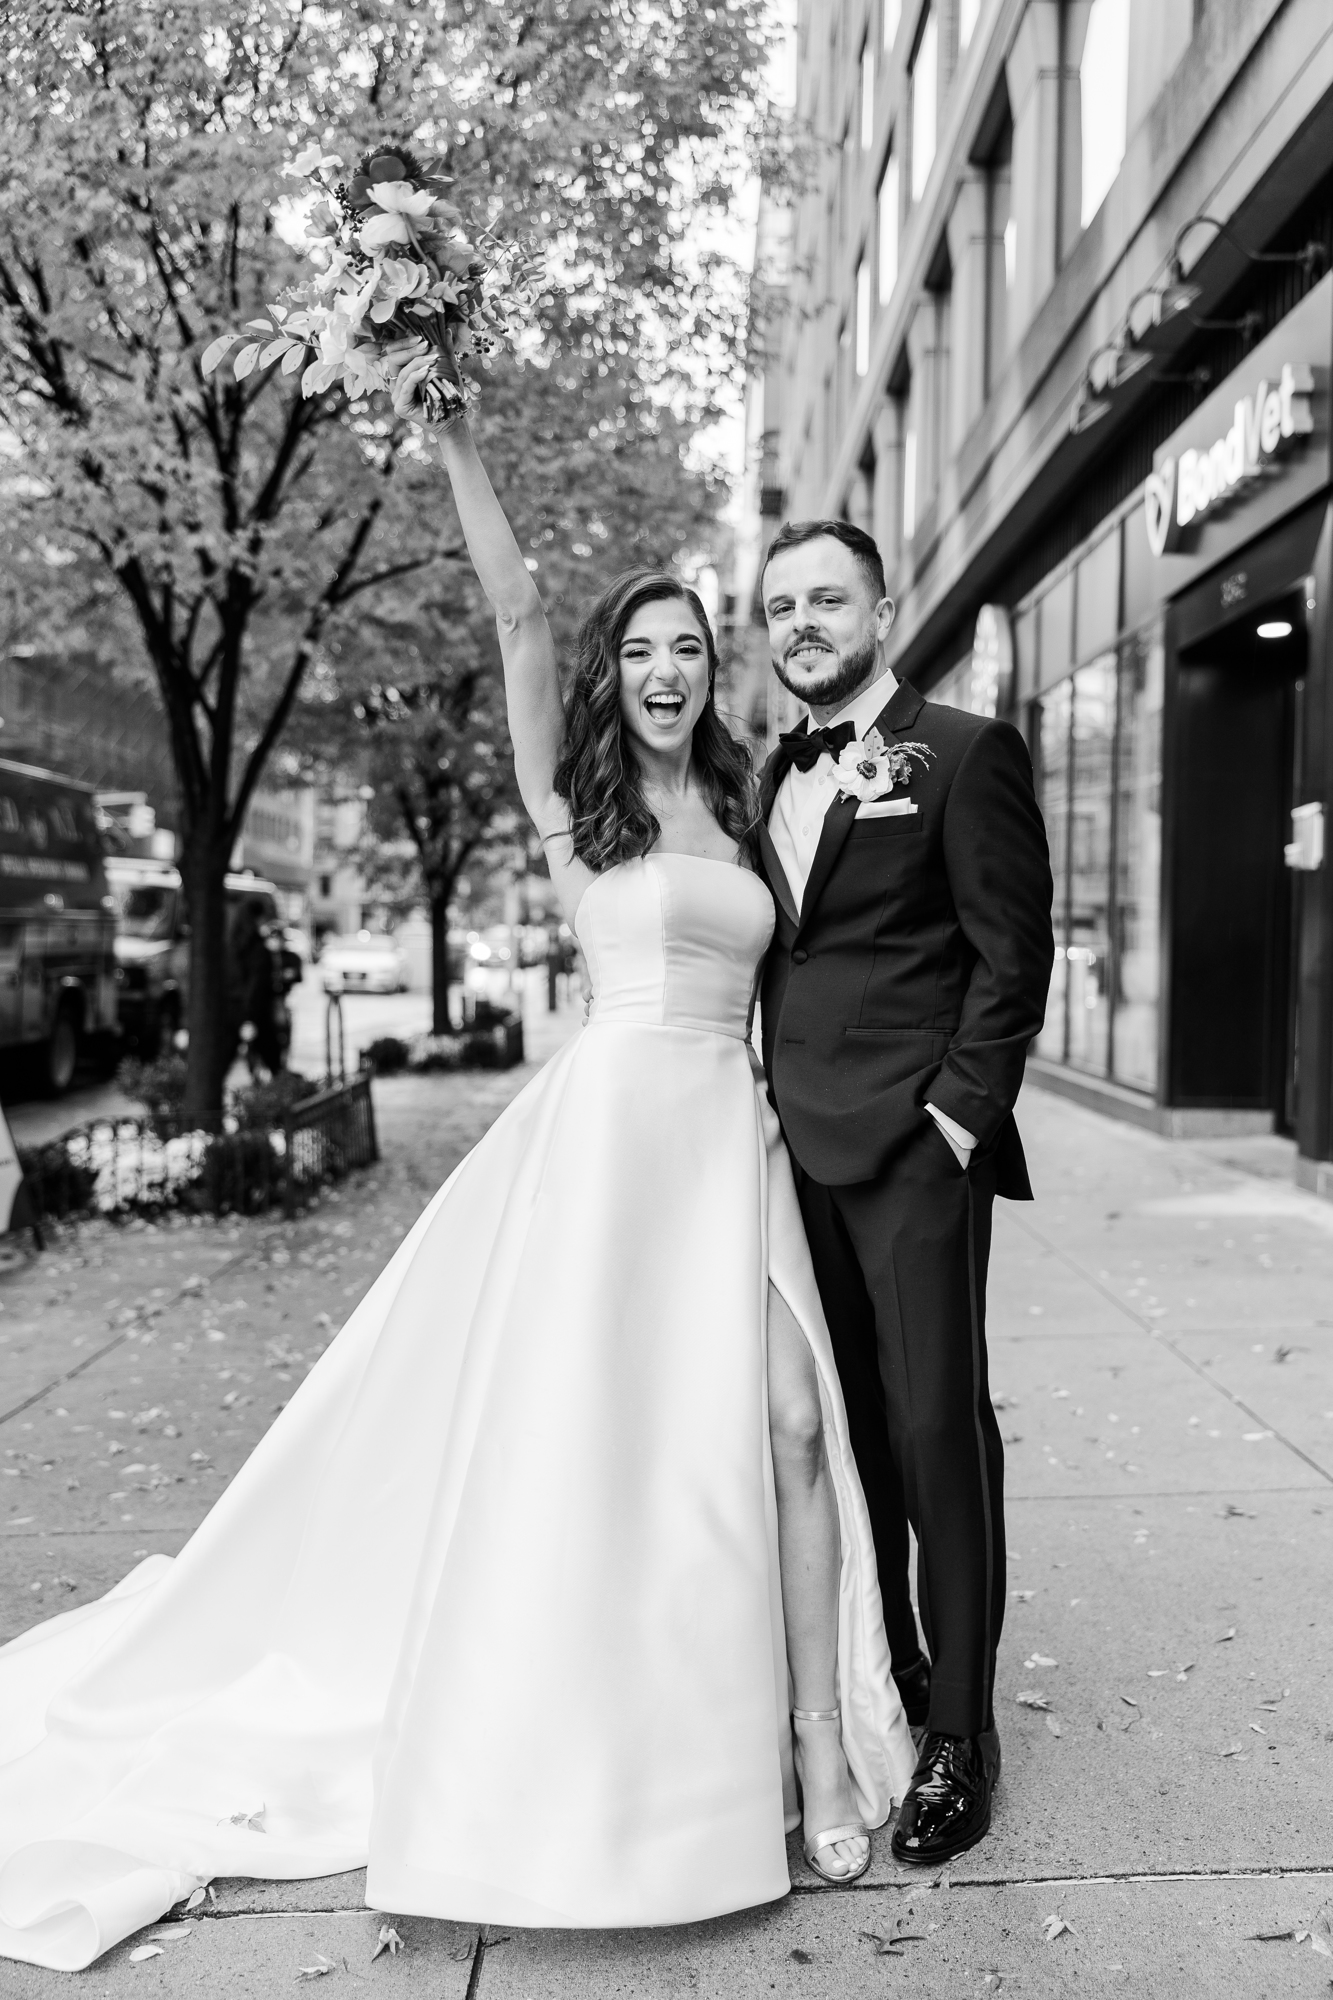 Black and white Rainy Fall Milling Room Wedding Photos in New York